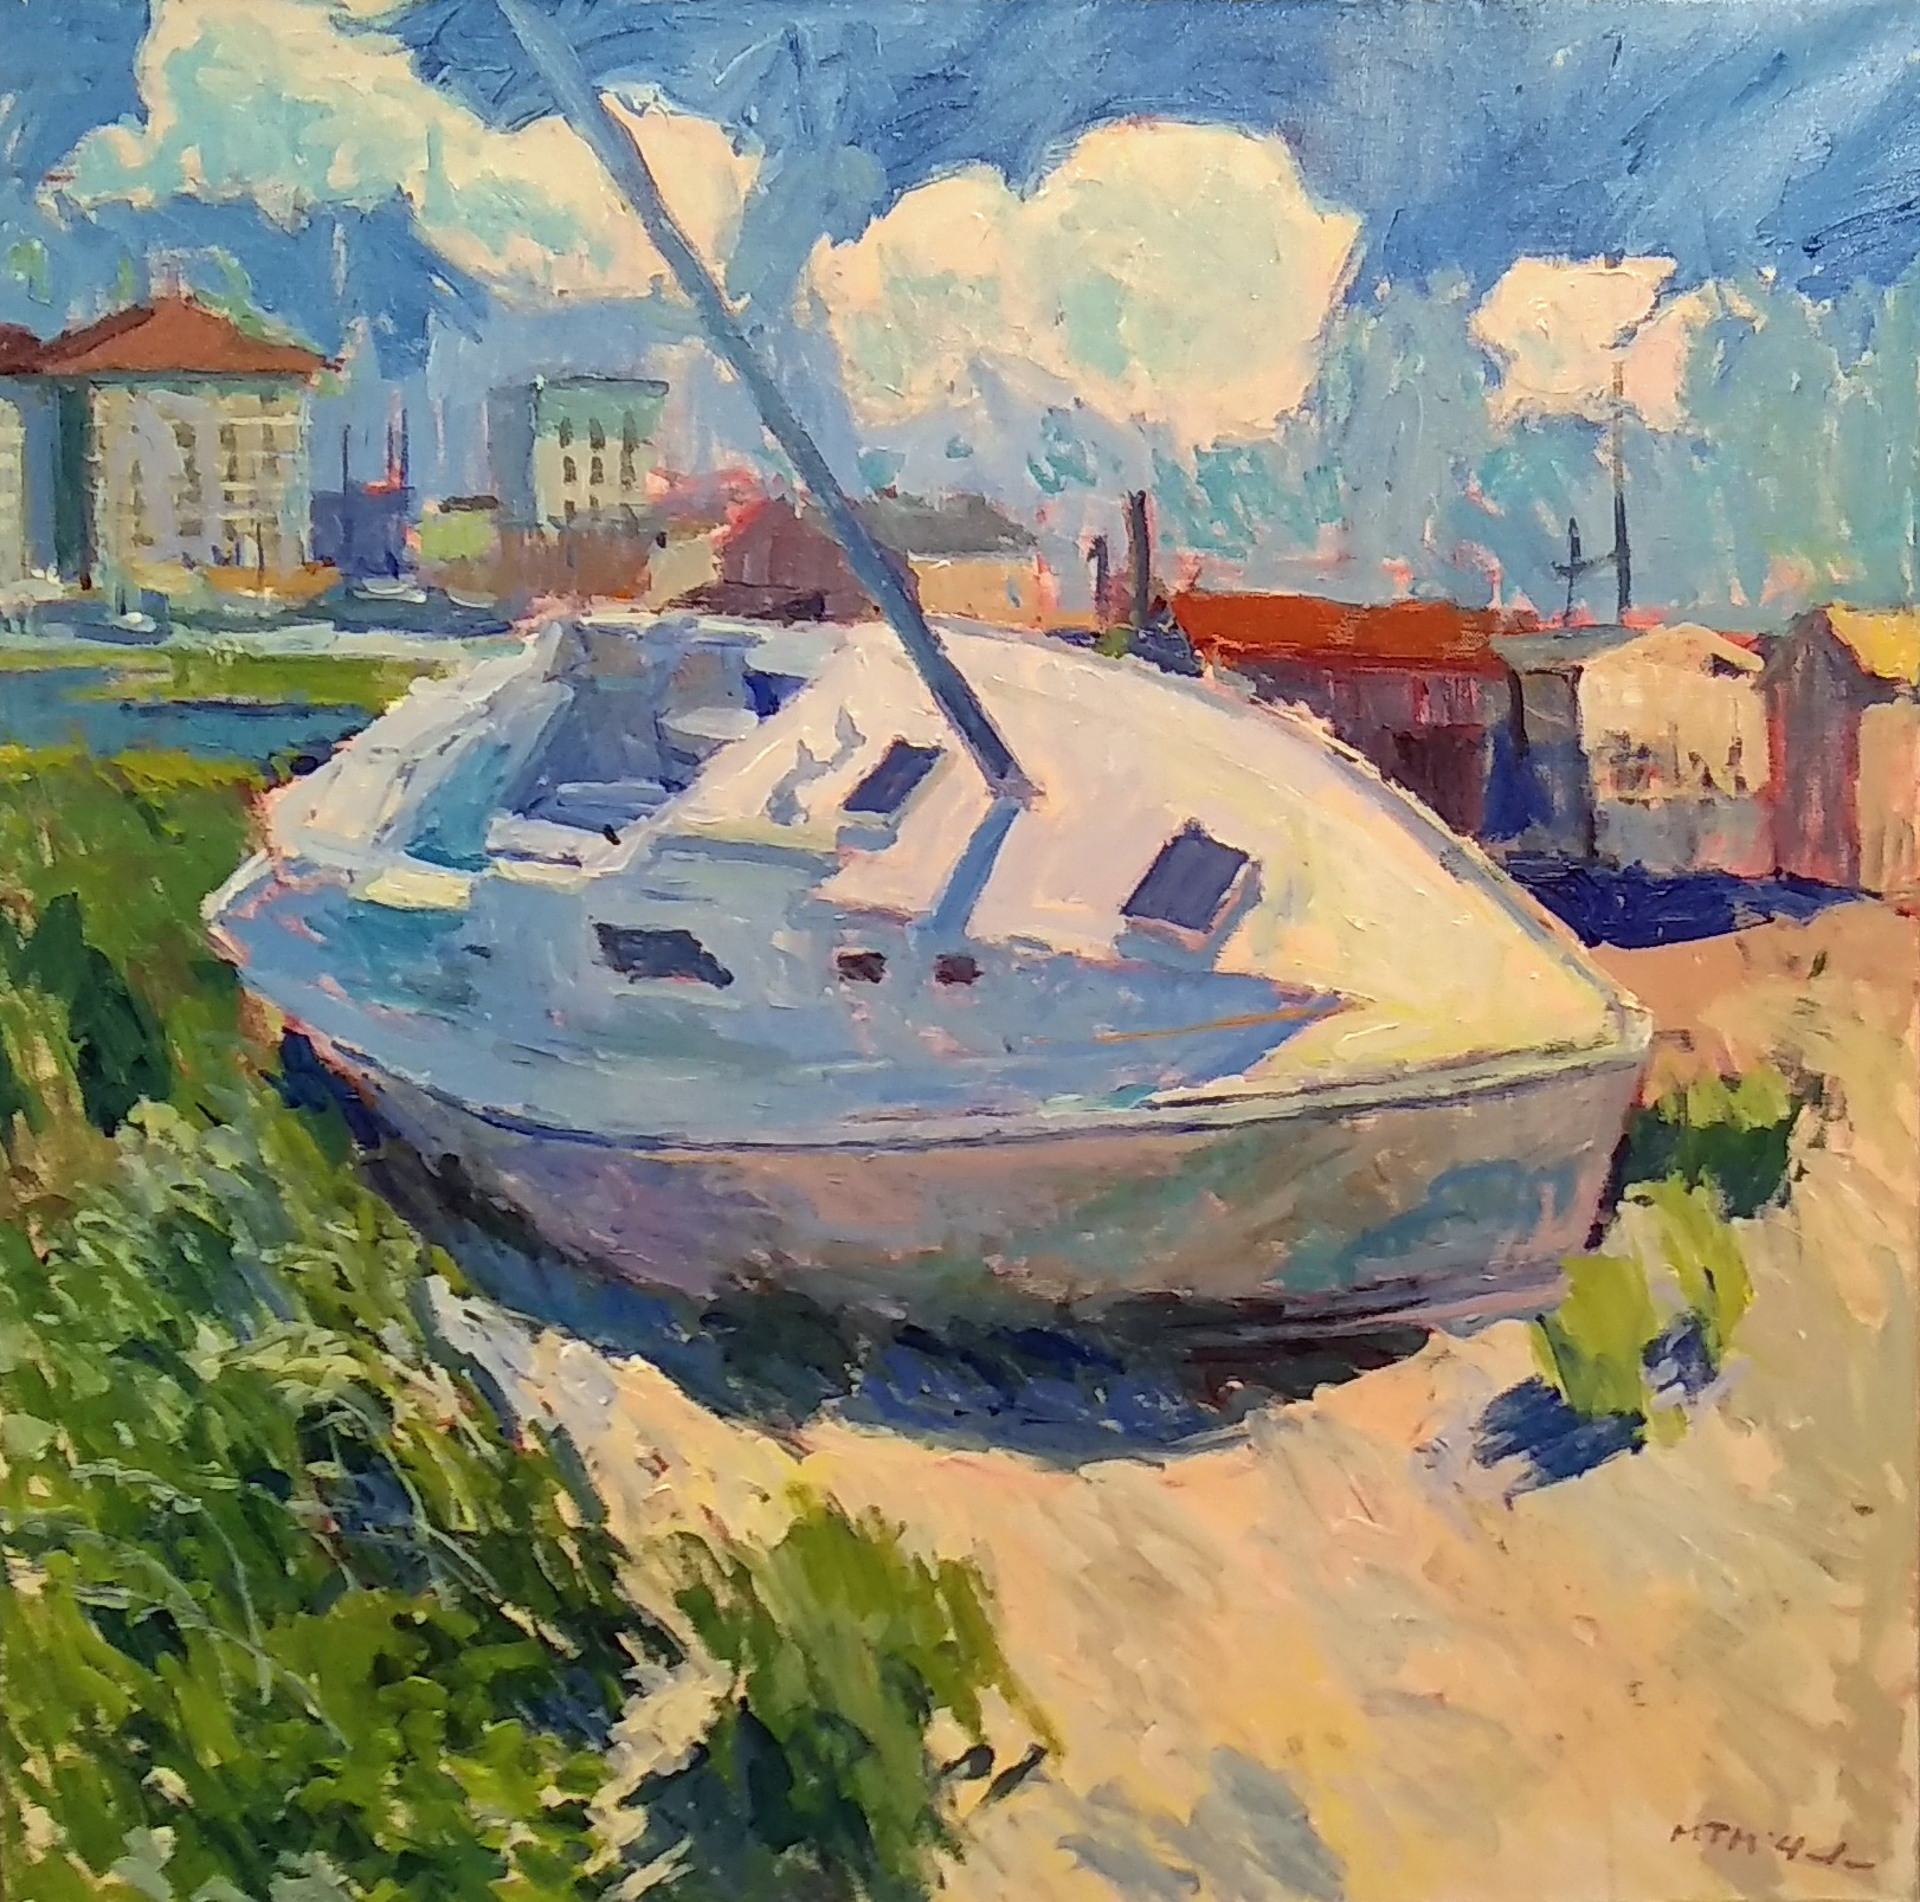 Beached Sailboat by M.T. McClanahan